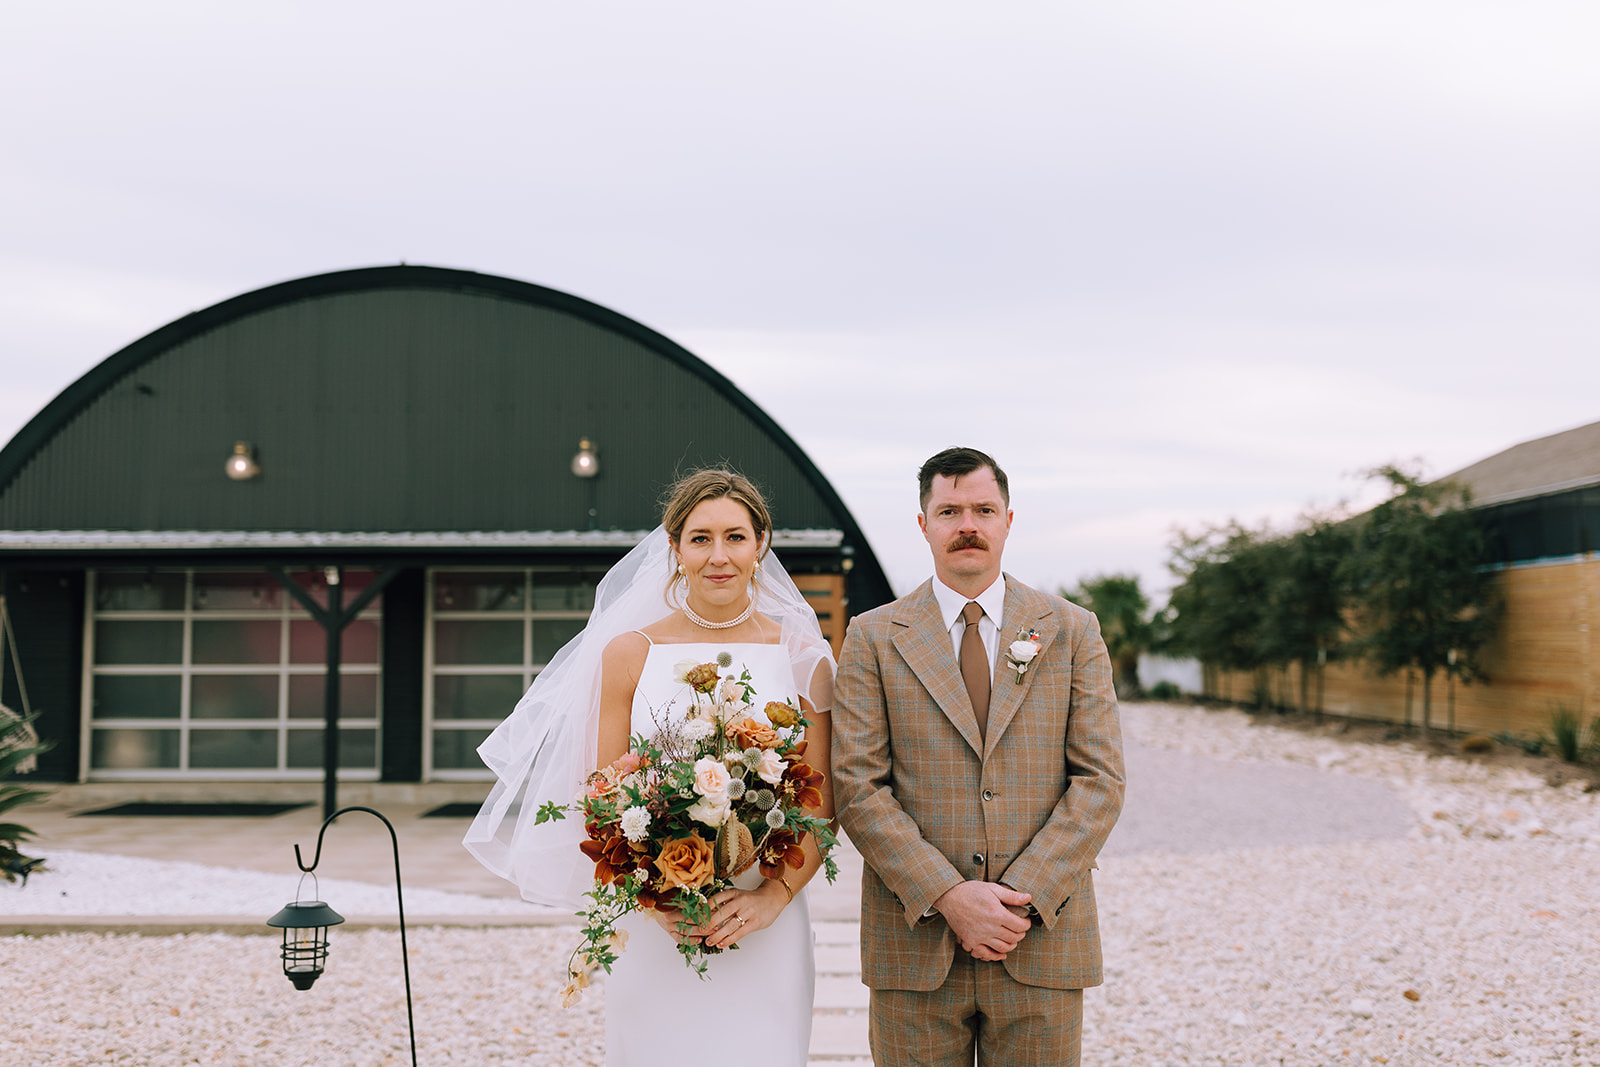 couple stands side by side at outdoor wedding venue